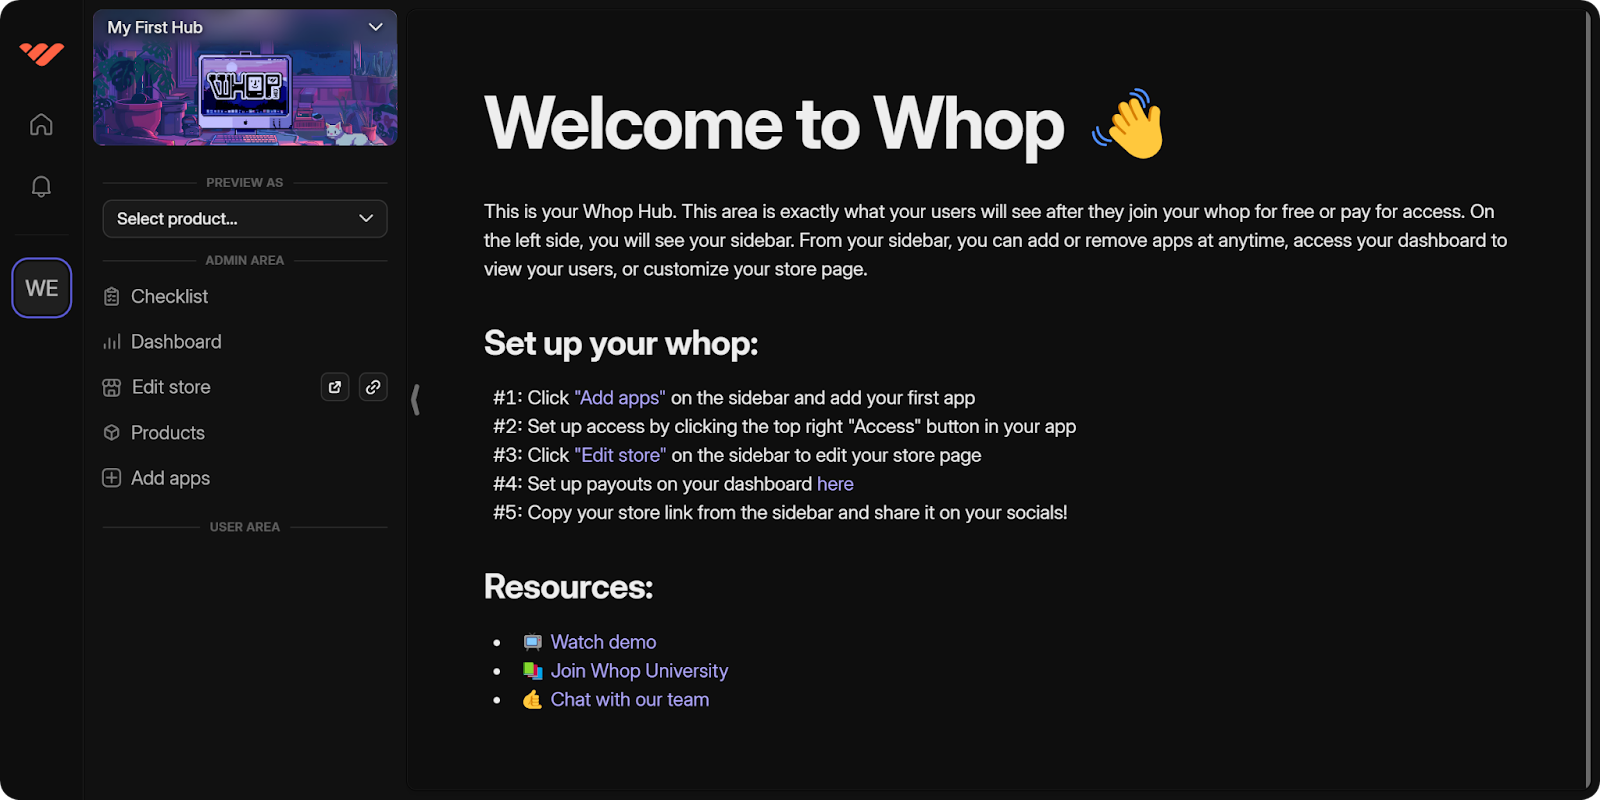 The Checklist section of a Hub on Whop